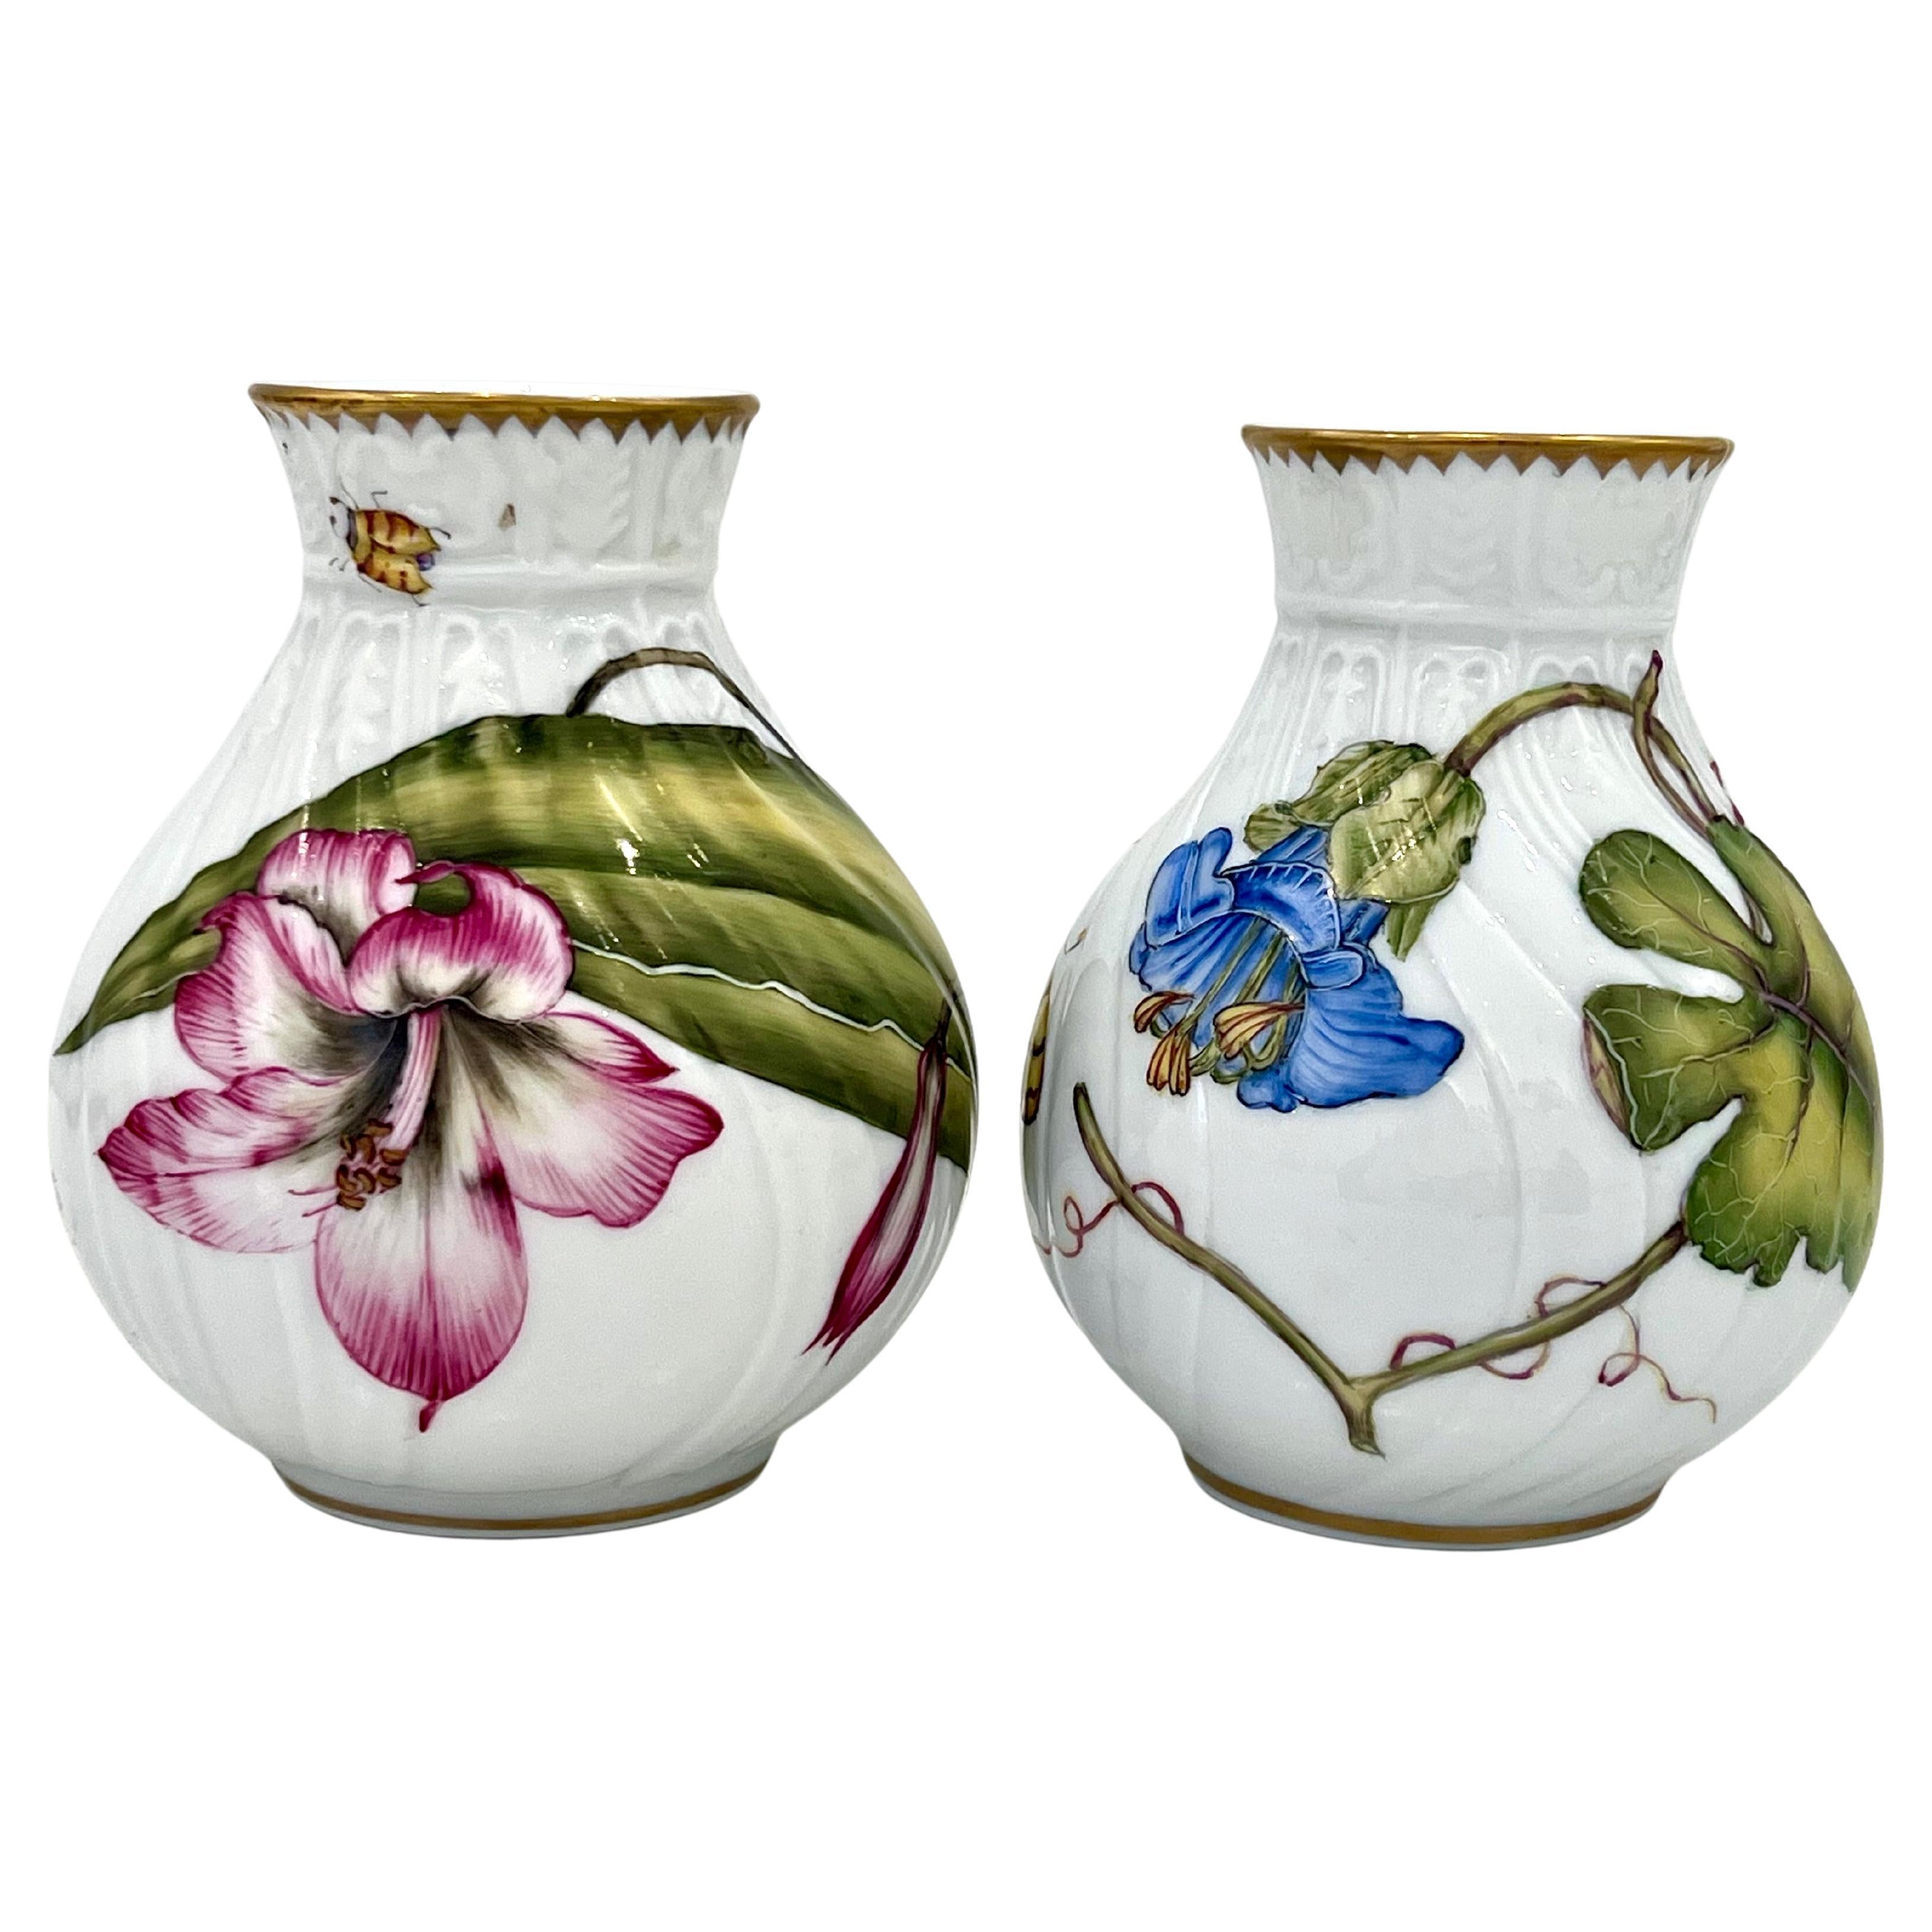 Hand Painted Porcelain Bud Vases Designed by Anna Weatherley